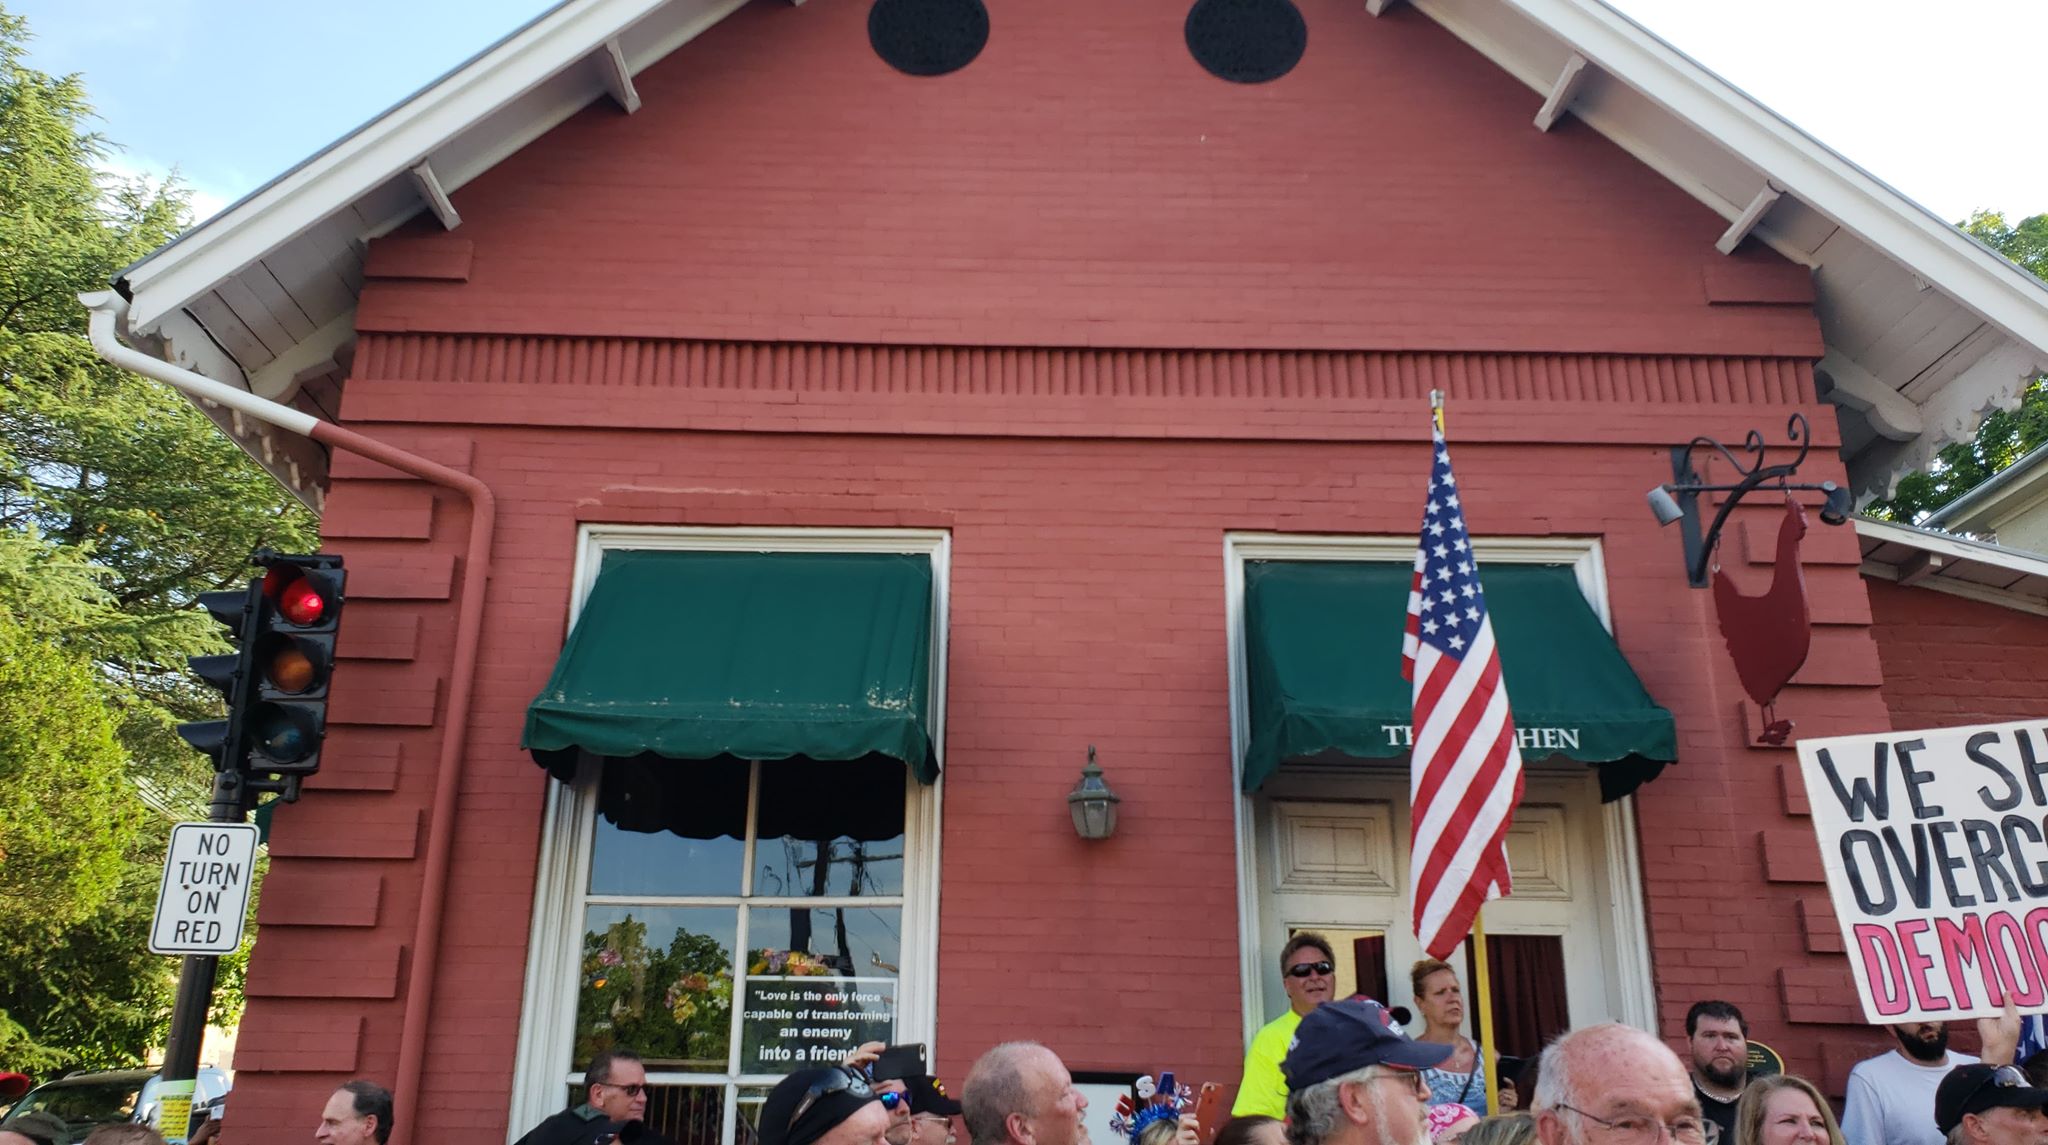 Bikers For Trump showcase the The Red Hen building in support of Sarah Huckabee Sanders. Image credit to Mackall W. Acheson III.